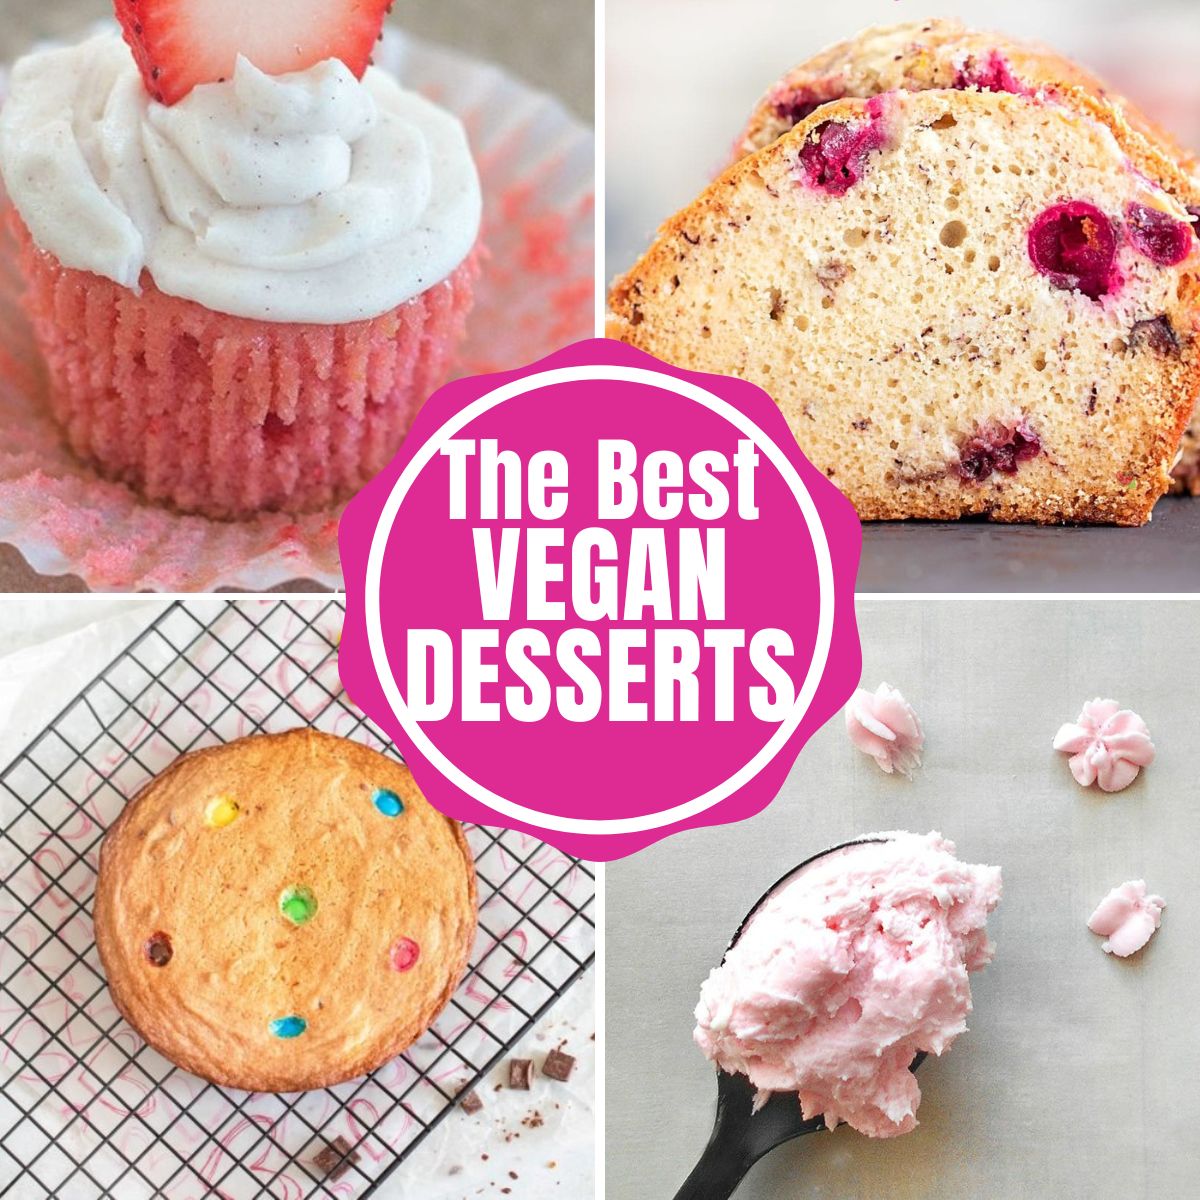 A collage of 4 vegan dessert recipe images with the words "The Best Vegan Desserts" written on it